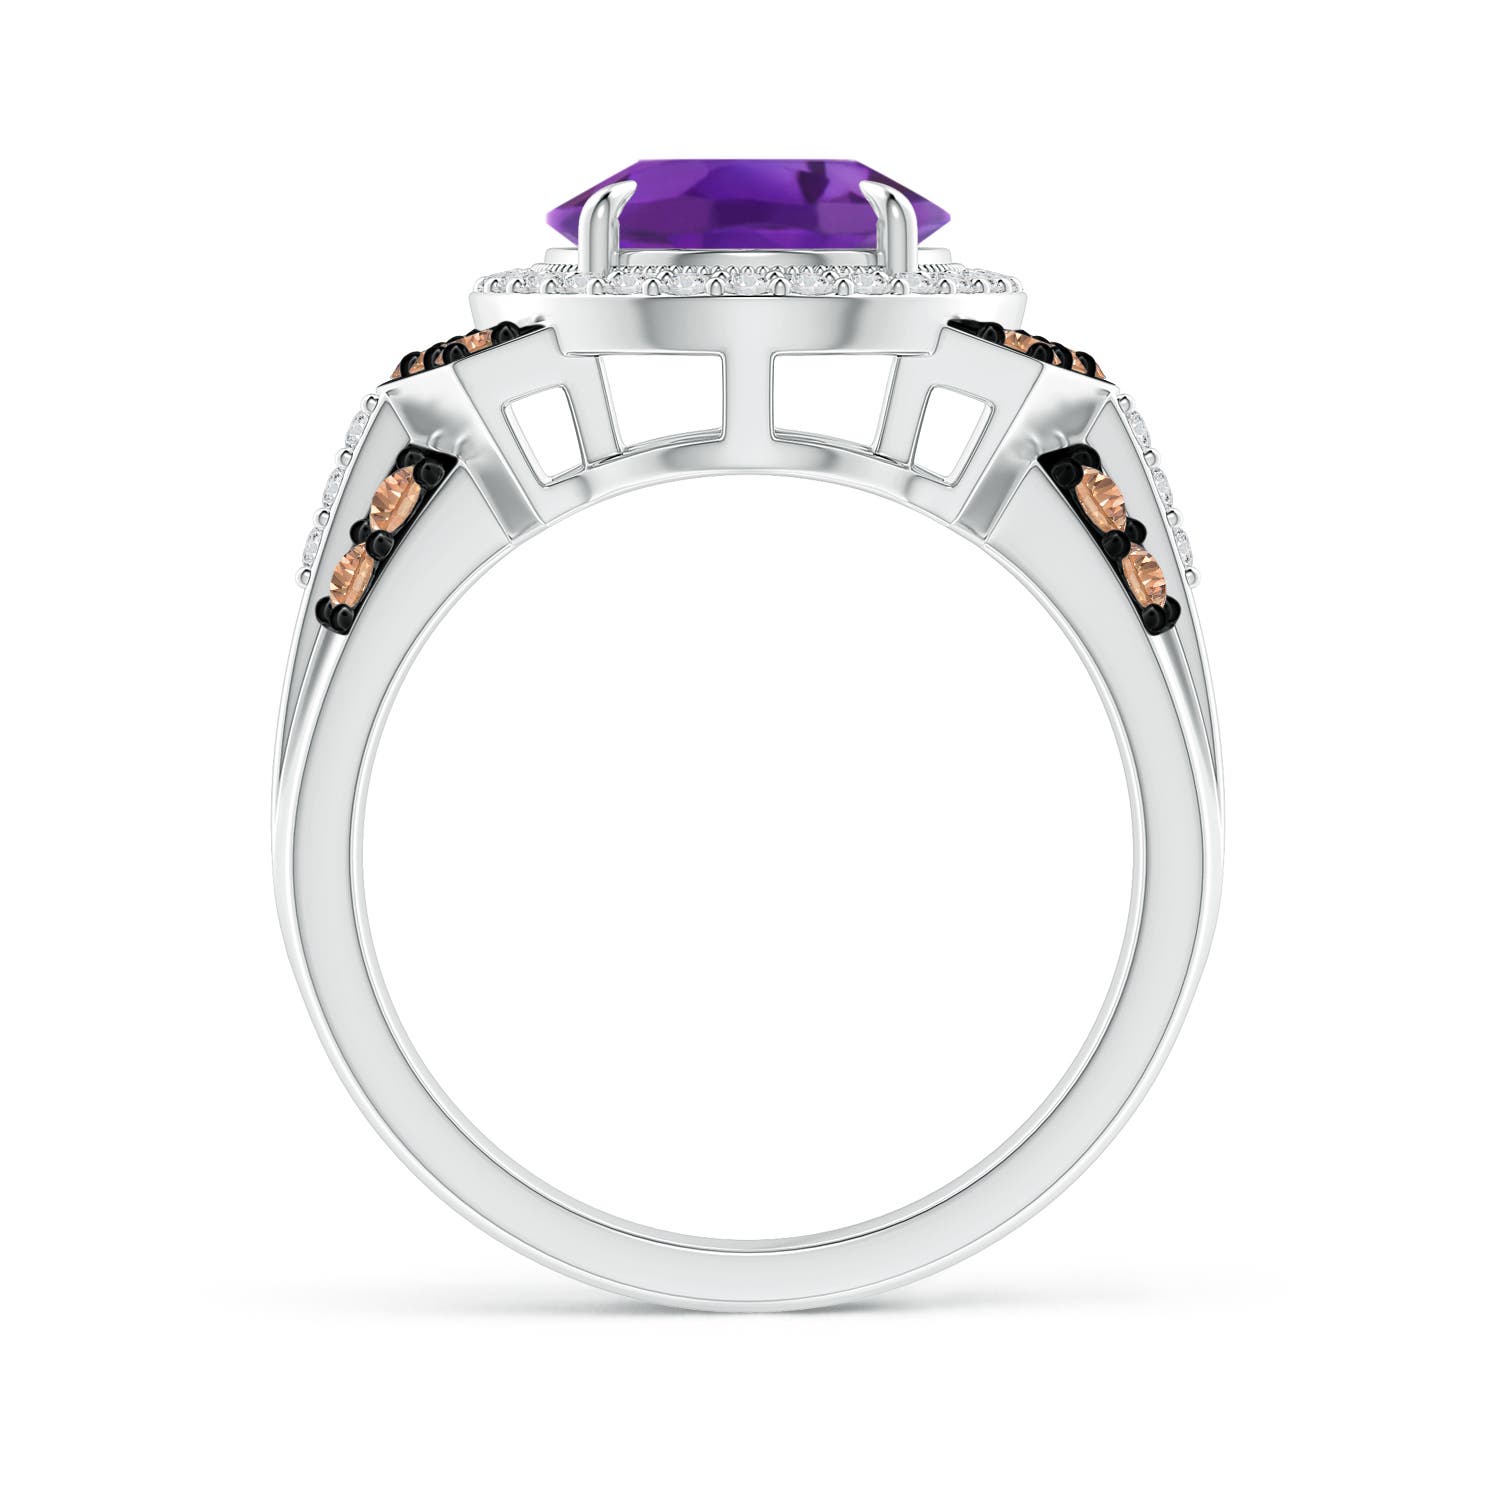 AAA - Amethyst / 3.8 CT / 14 KT White Gold